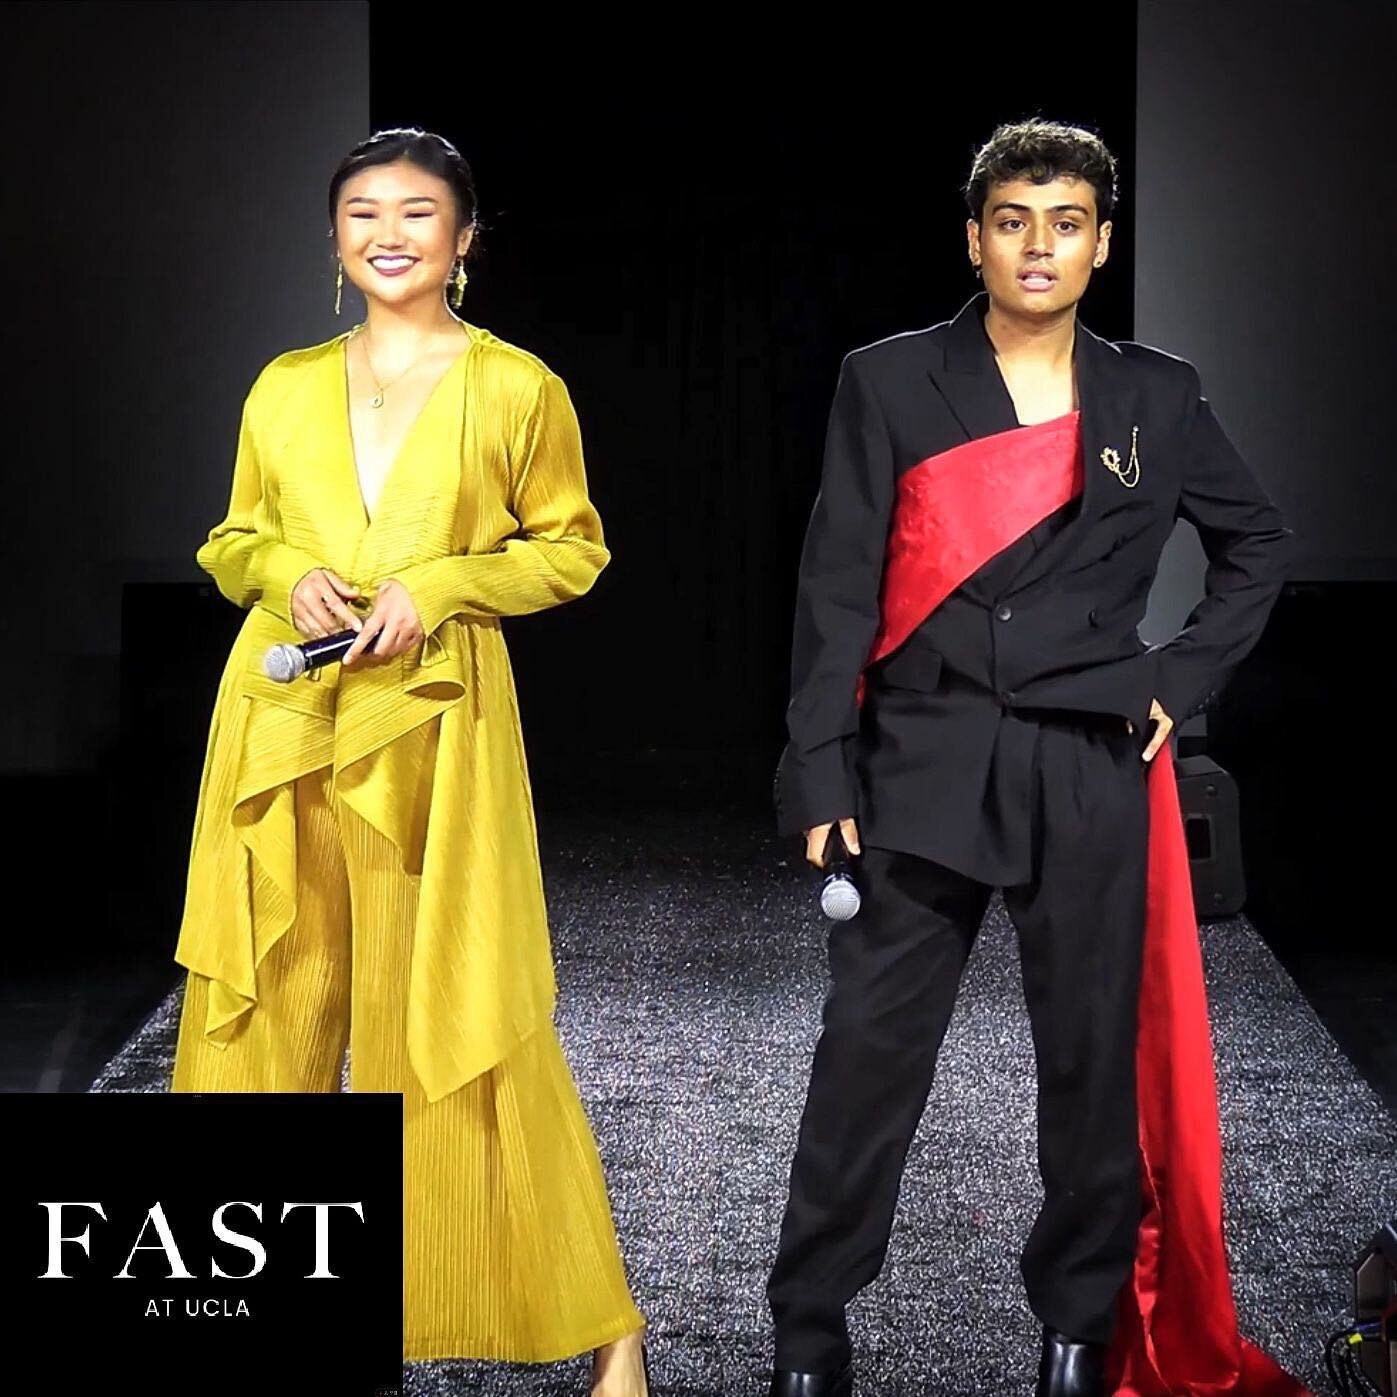 ICYMI: @fastatucla had their annual student fashion show this past Friday at @ucla and had some amazing looks. Watch the entire fashion show now on their YouTube:
https://youtu.be/wYUw494LJ5k

#uclabruins #ucla #ucla#uclabound #uclaalumni #uclafashio